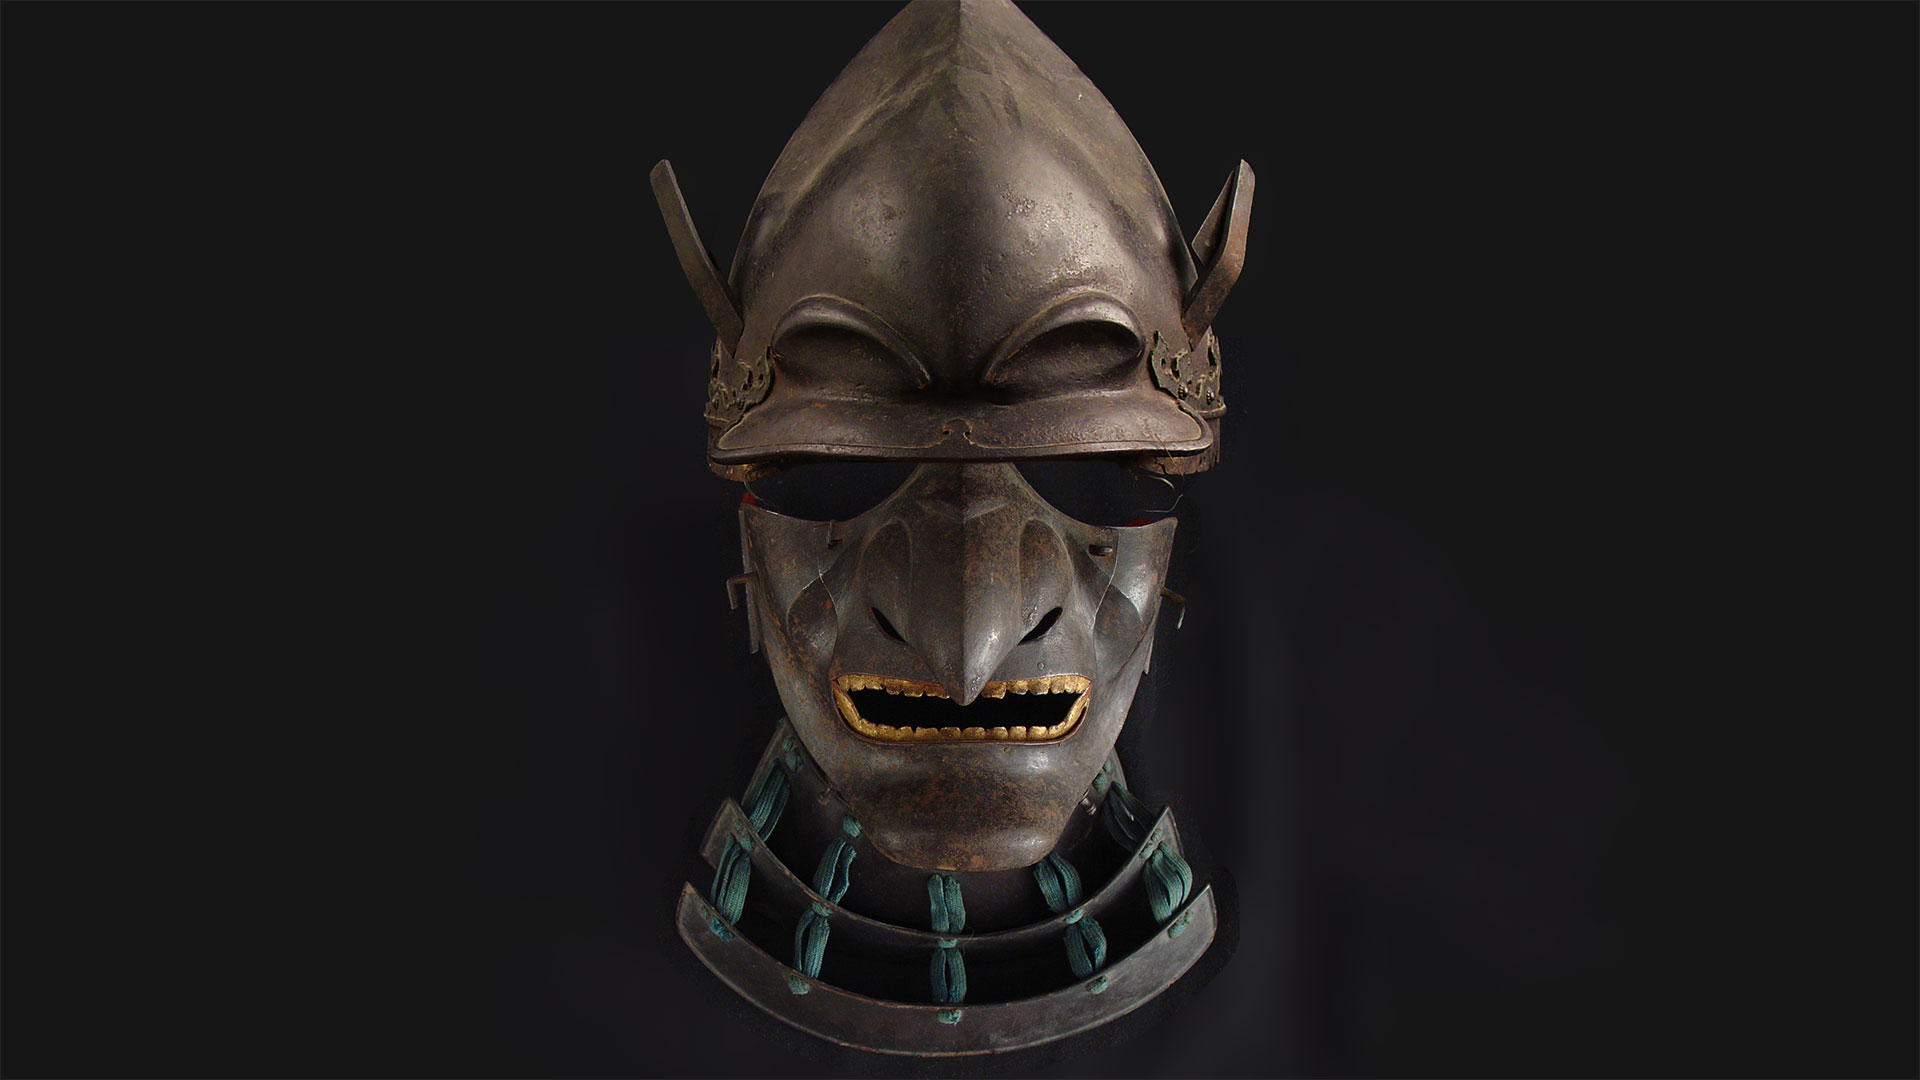 New Acquisition: Samurai Helmet and Mask overview image